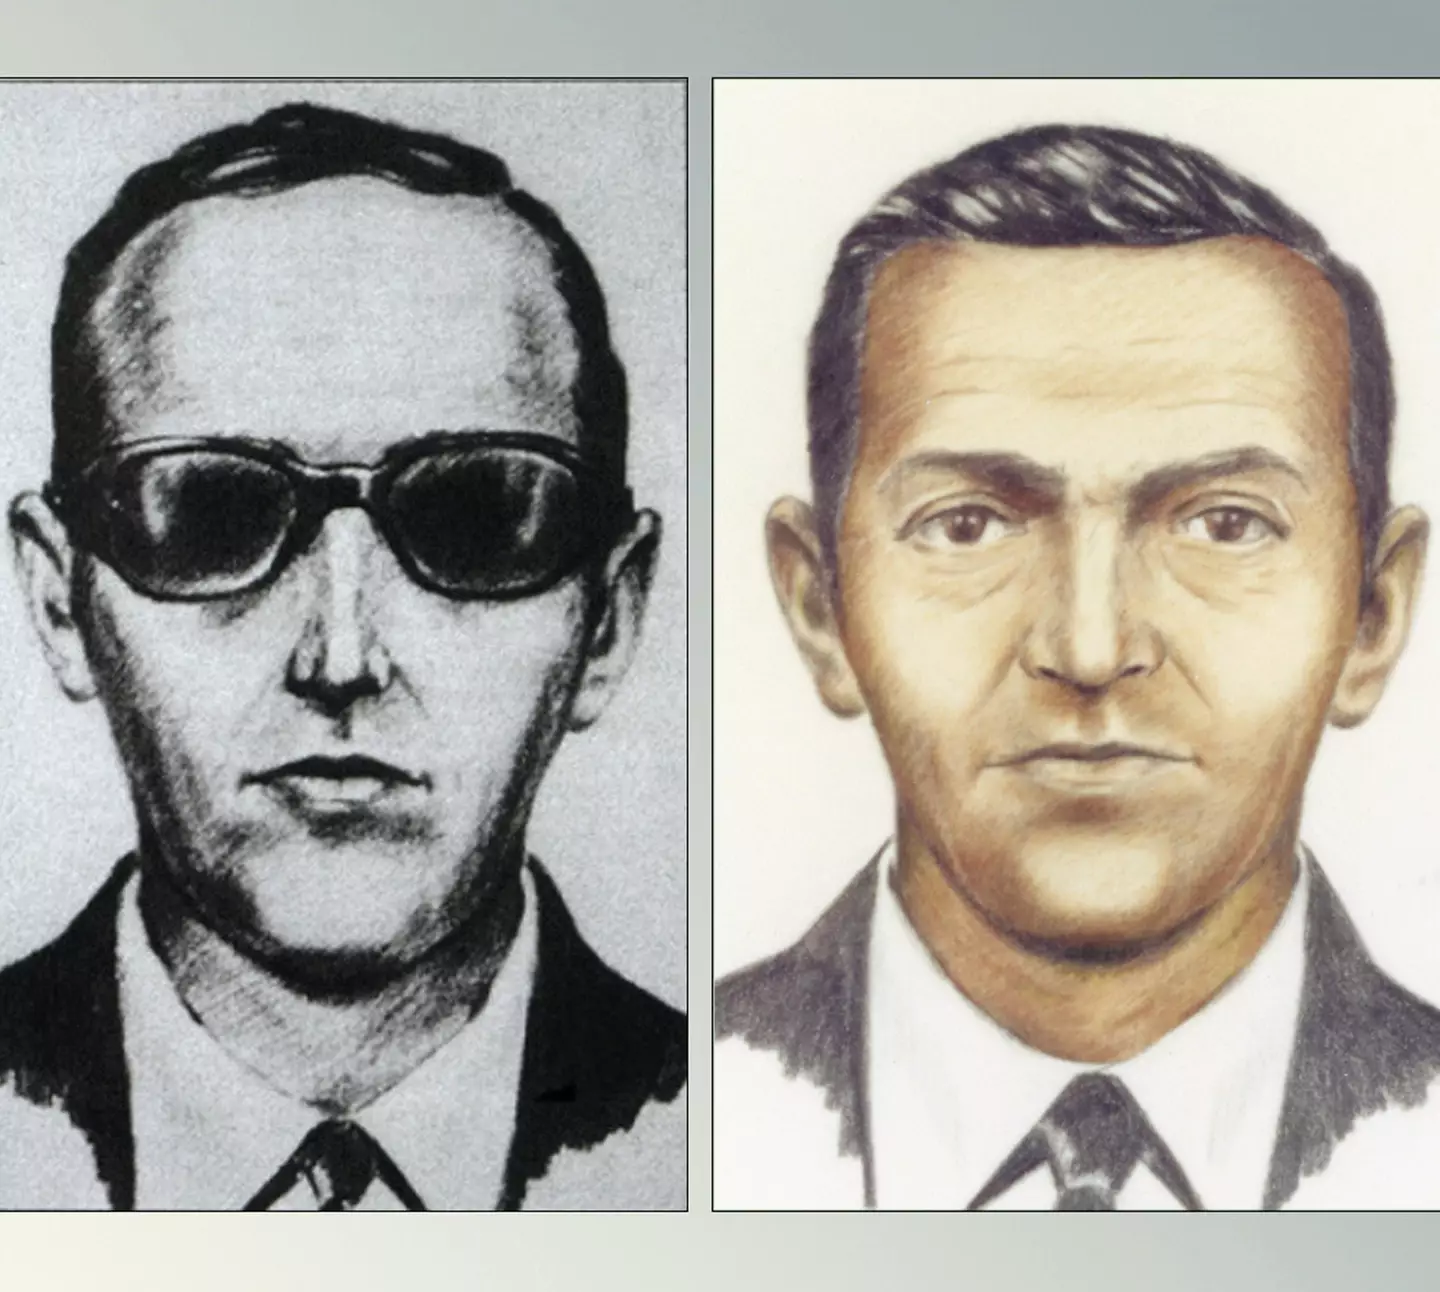 D.B. Cooper skyjacked a flight over 50 years ago, his case remains a mystery.